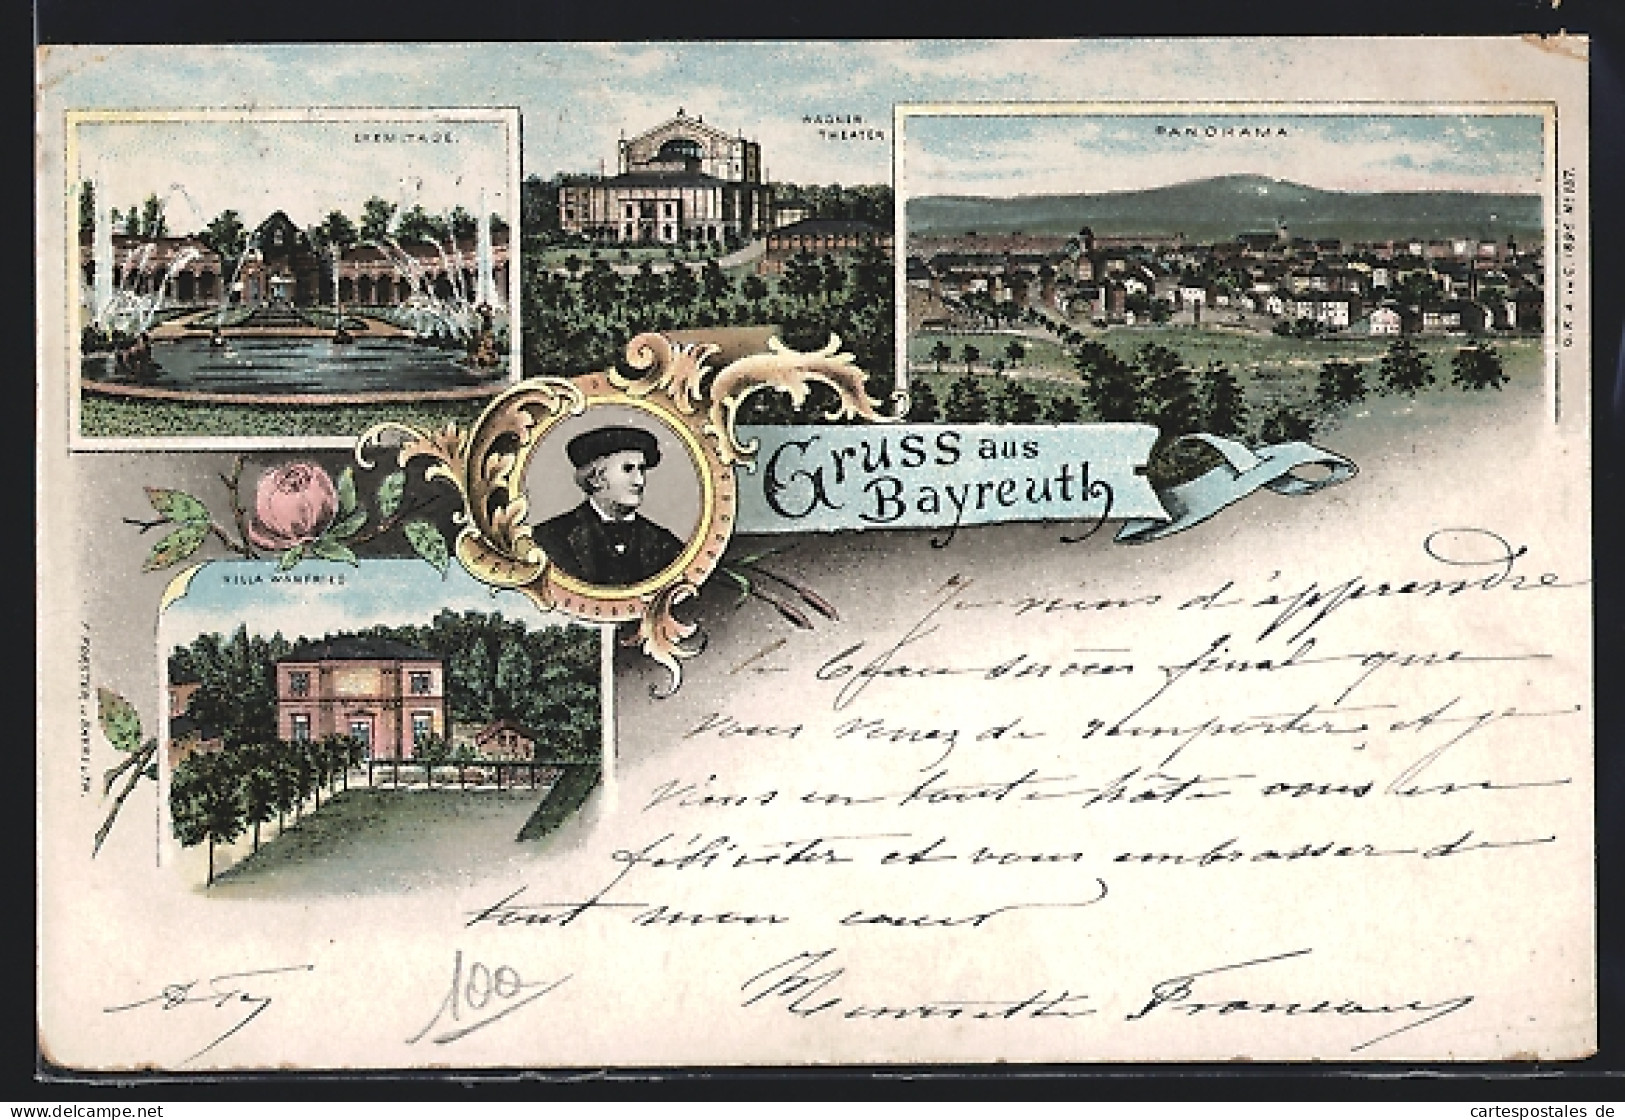 Lithographie Bayreuth, Wagner-Theater, Villa Wanfried, Eremitage, Panorama  - Theater